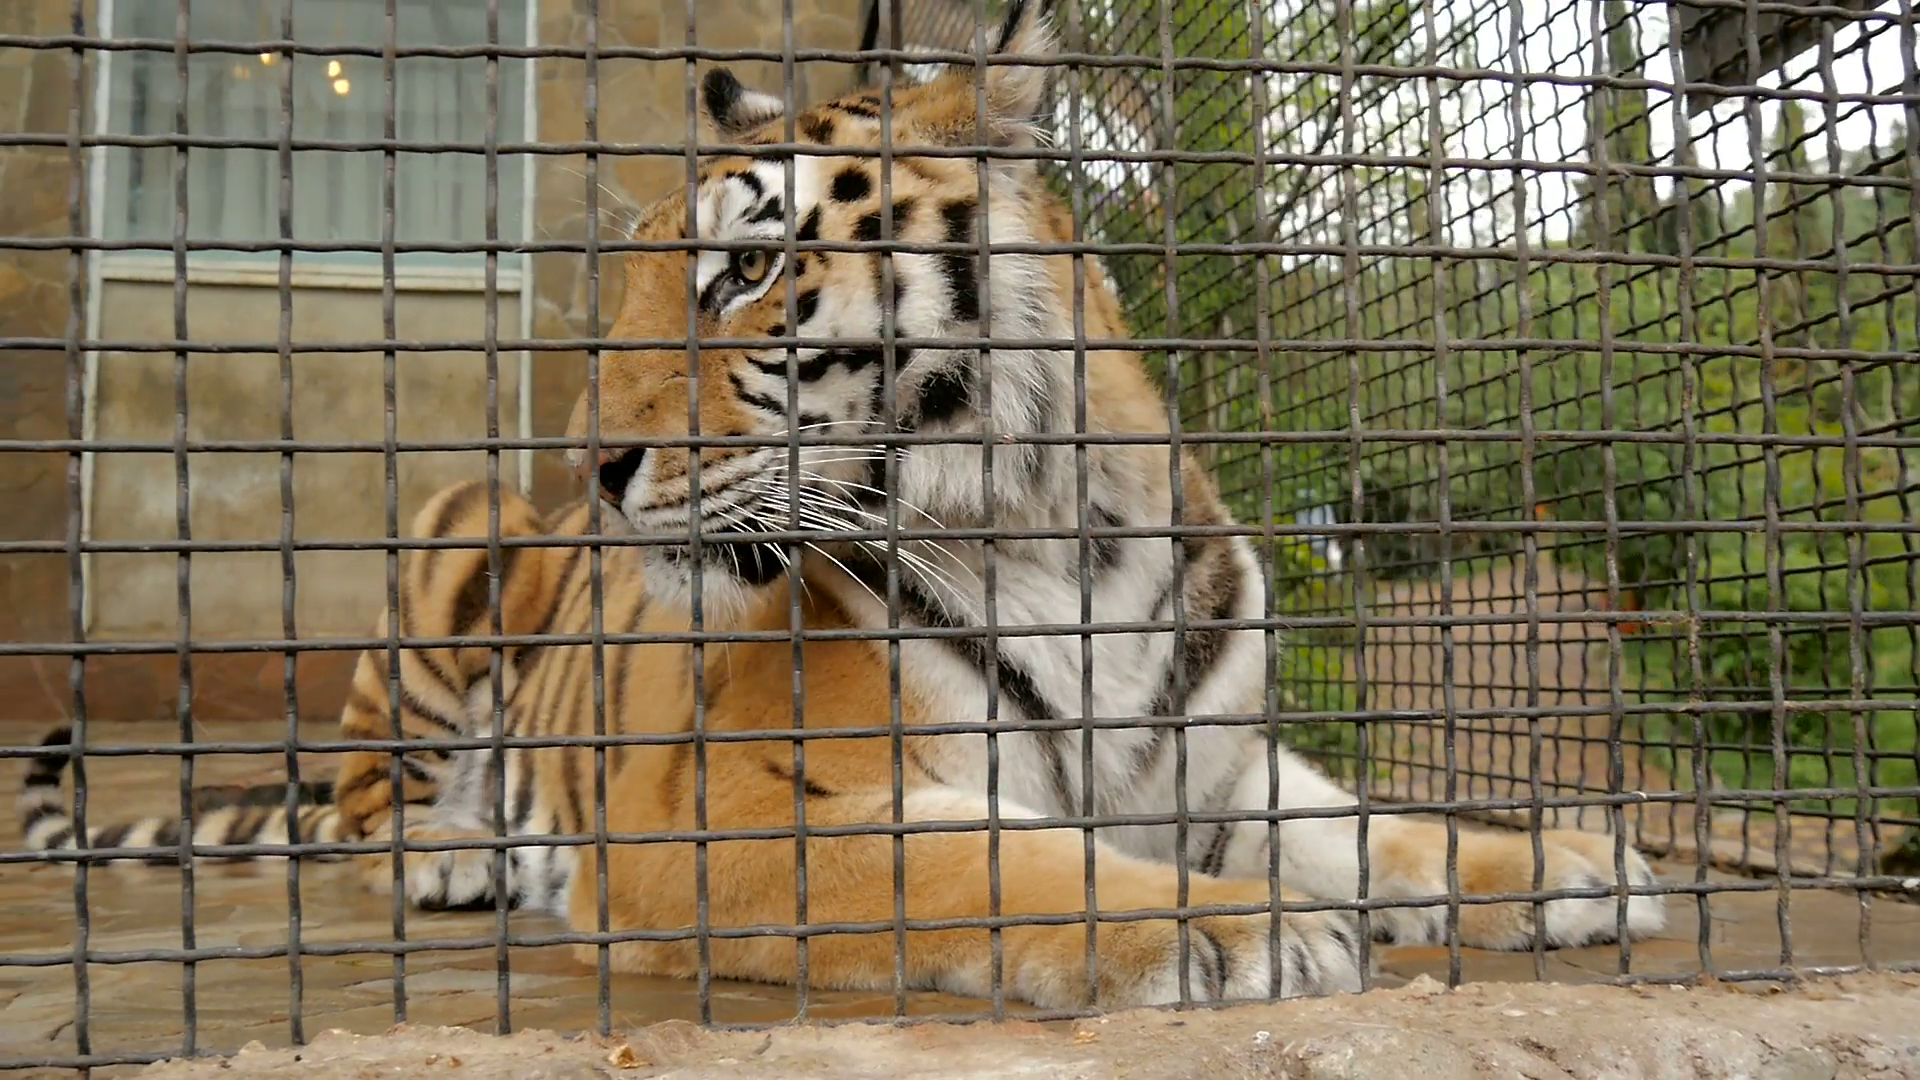 Tiger in the zoo cage Stock Video Footage - VideoBlocks